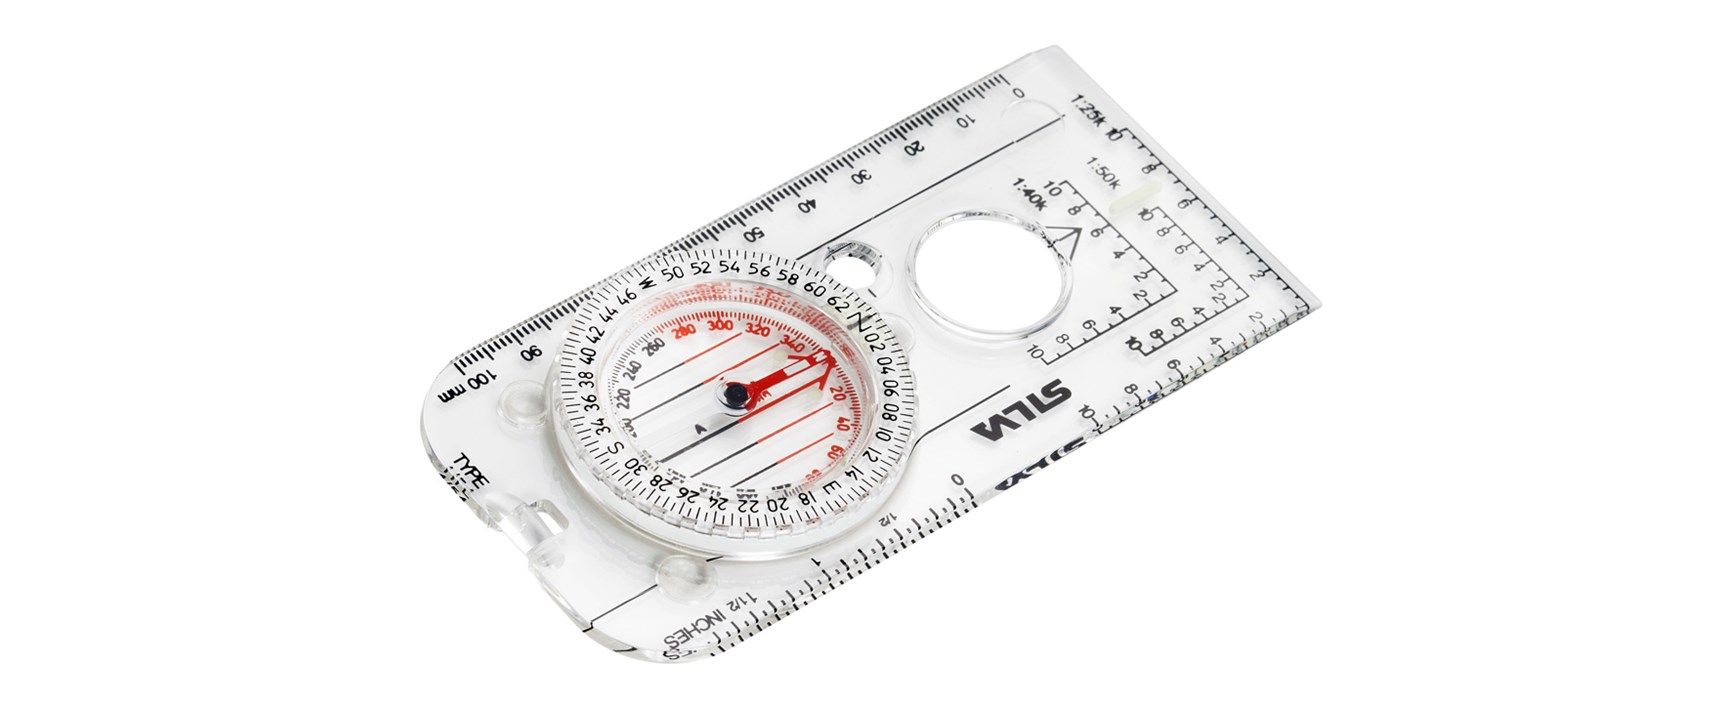 Silva Expedition 4 Military Compass